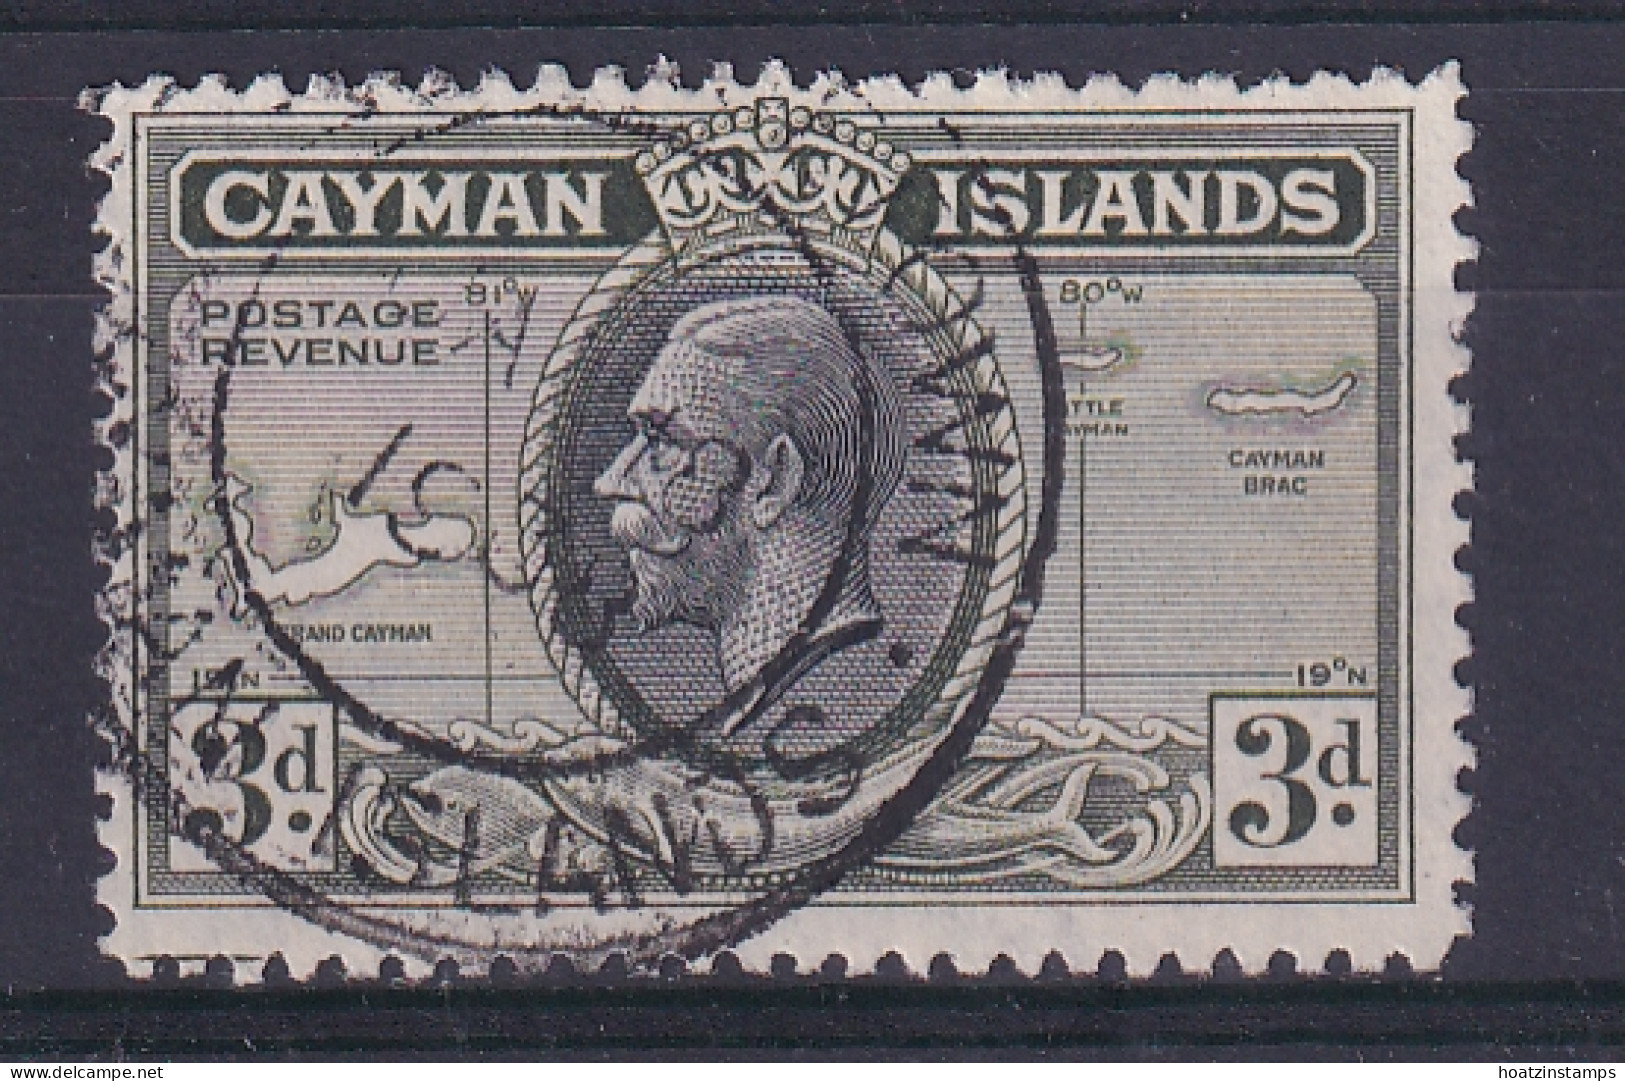 Cayman Islands: 1935   KGV - Pictorial   SG102   3d    Used - Cayman Islands